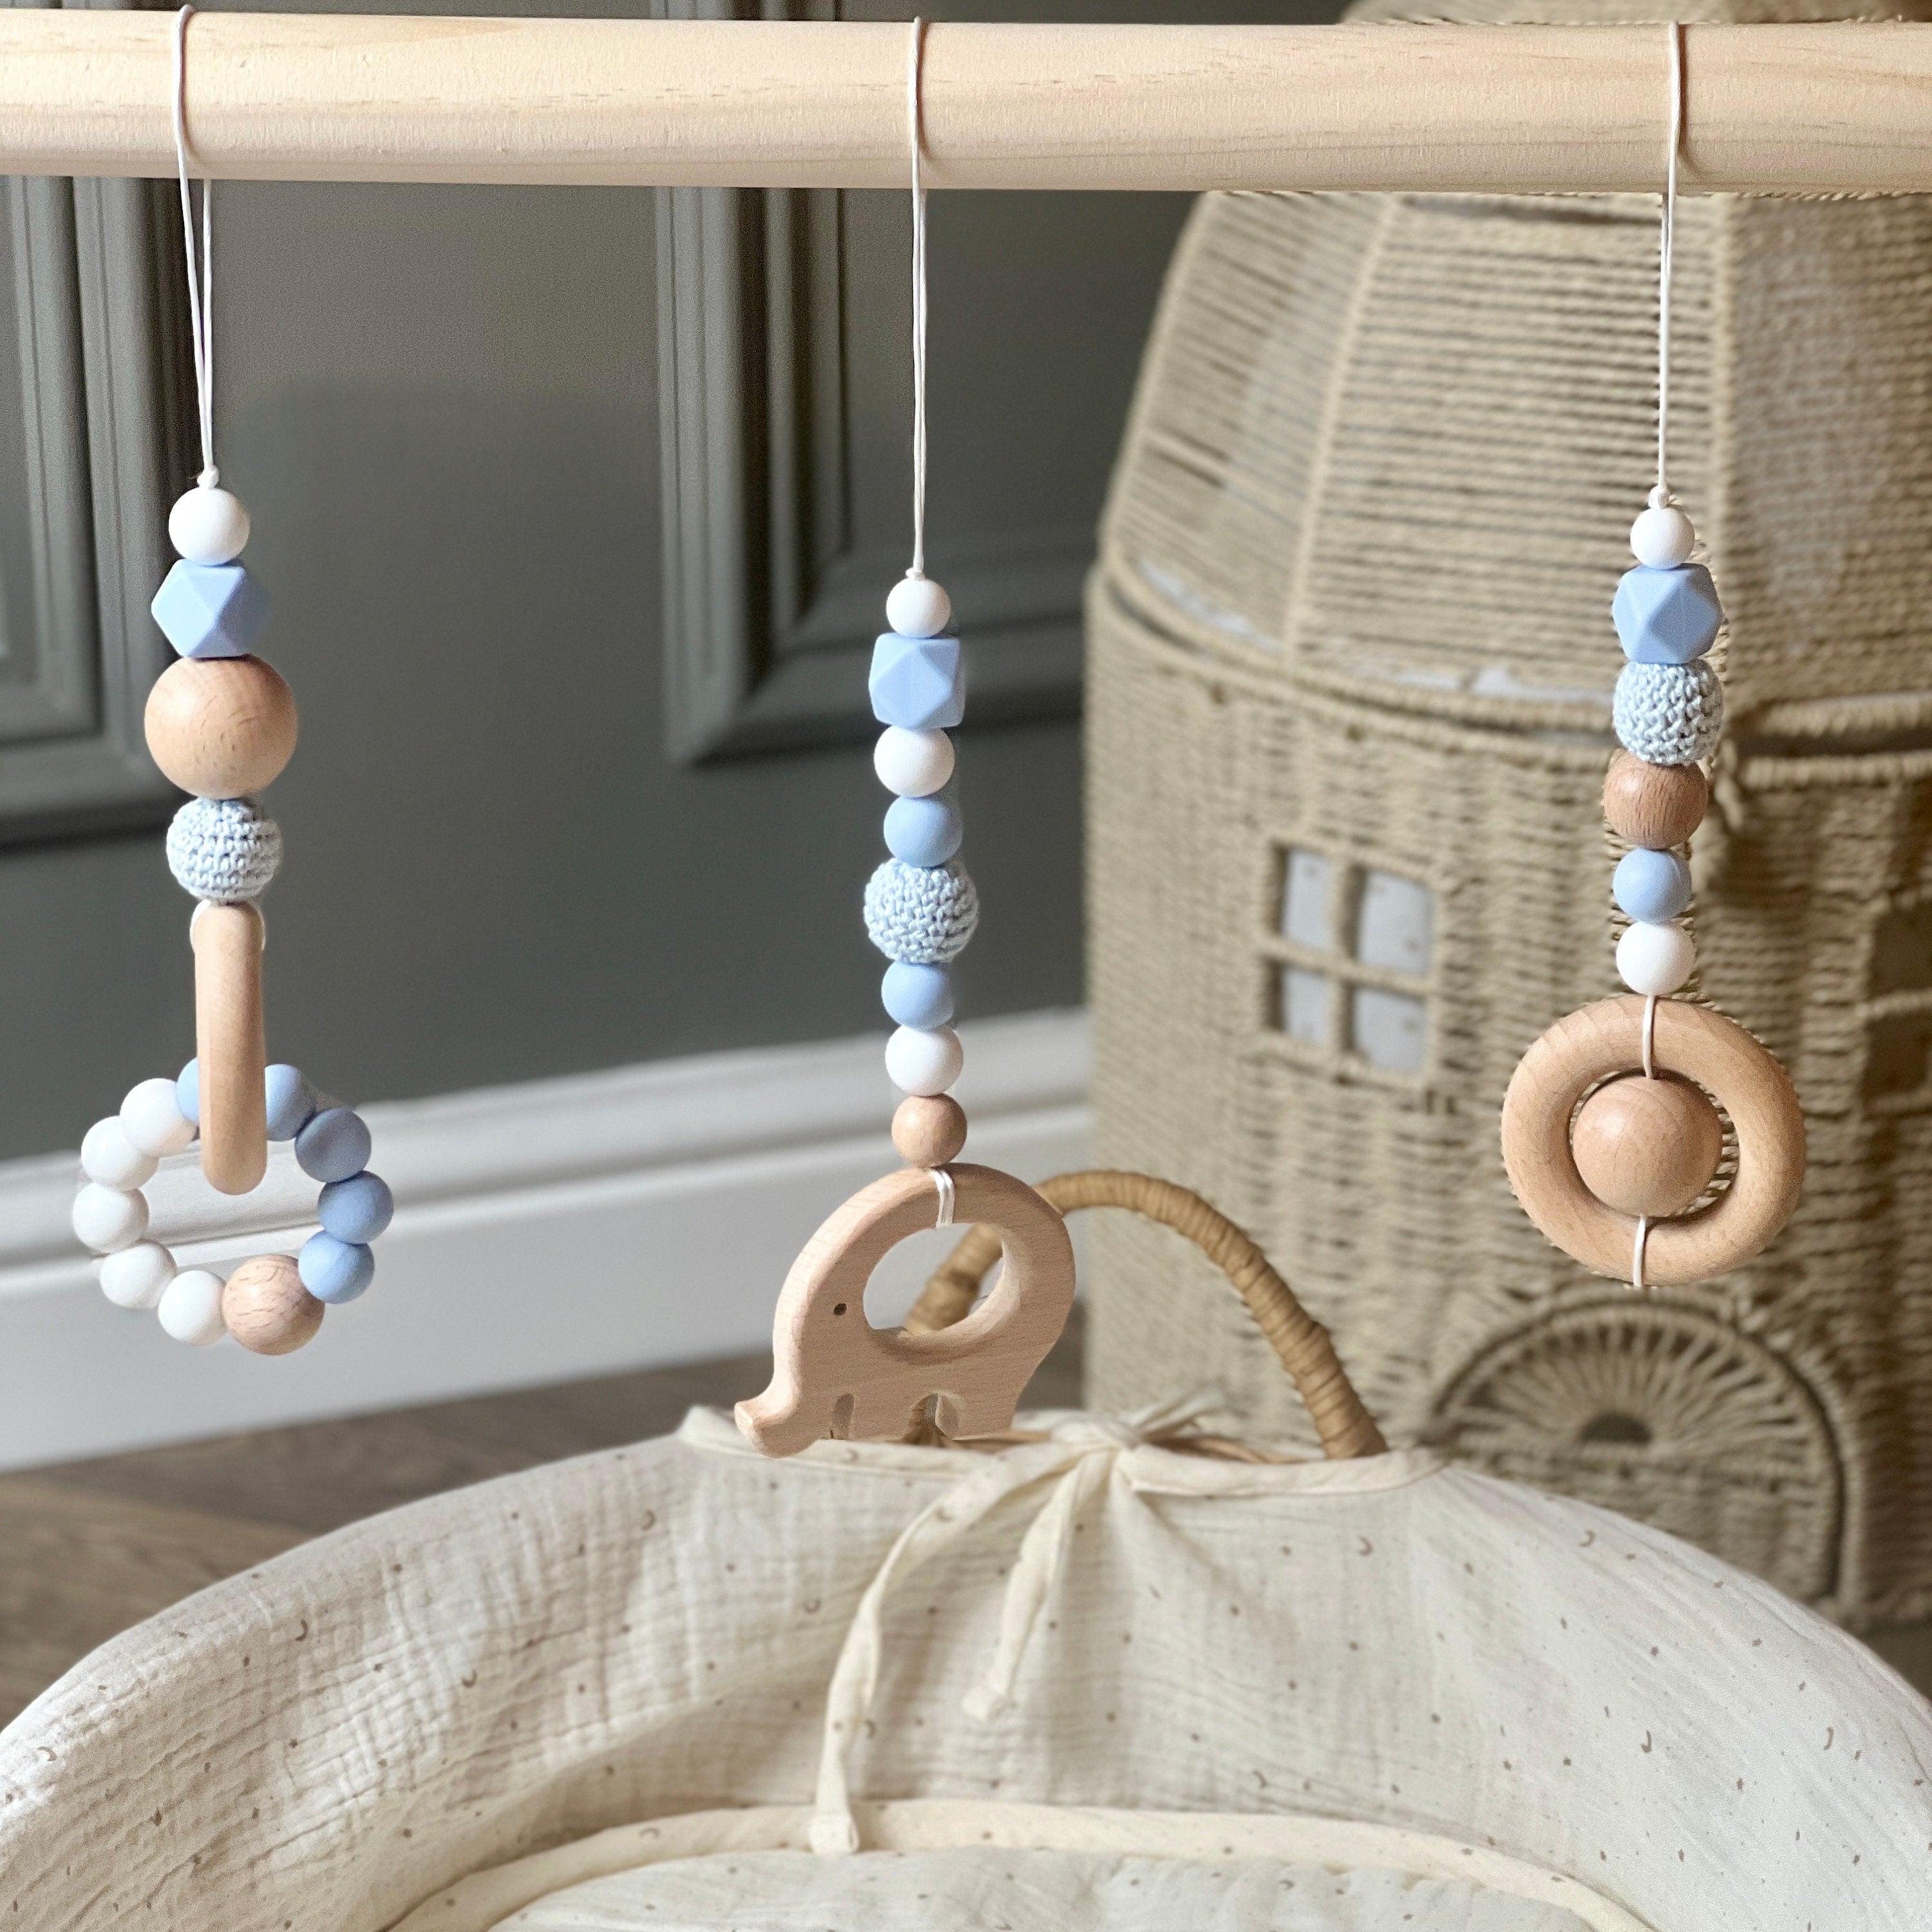 Wooden Baby Play Gym with Blue Hanging Toys